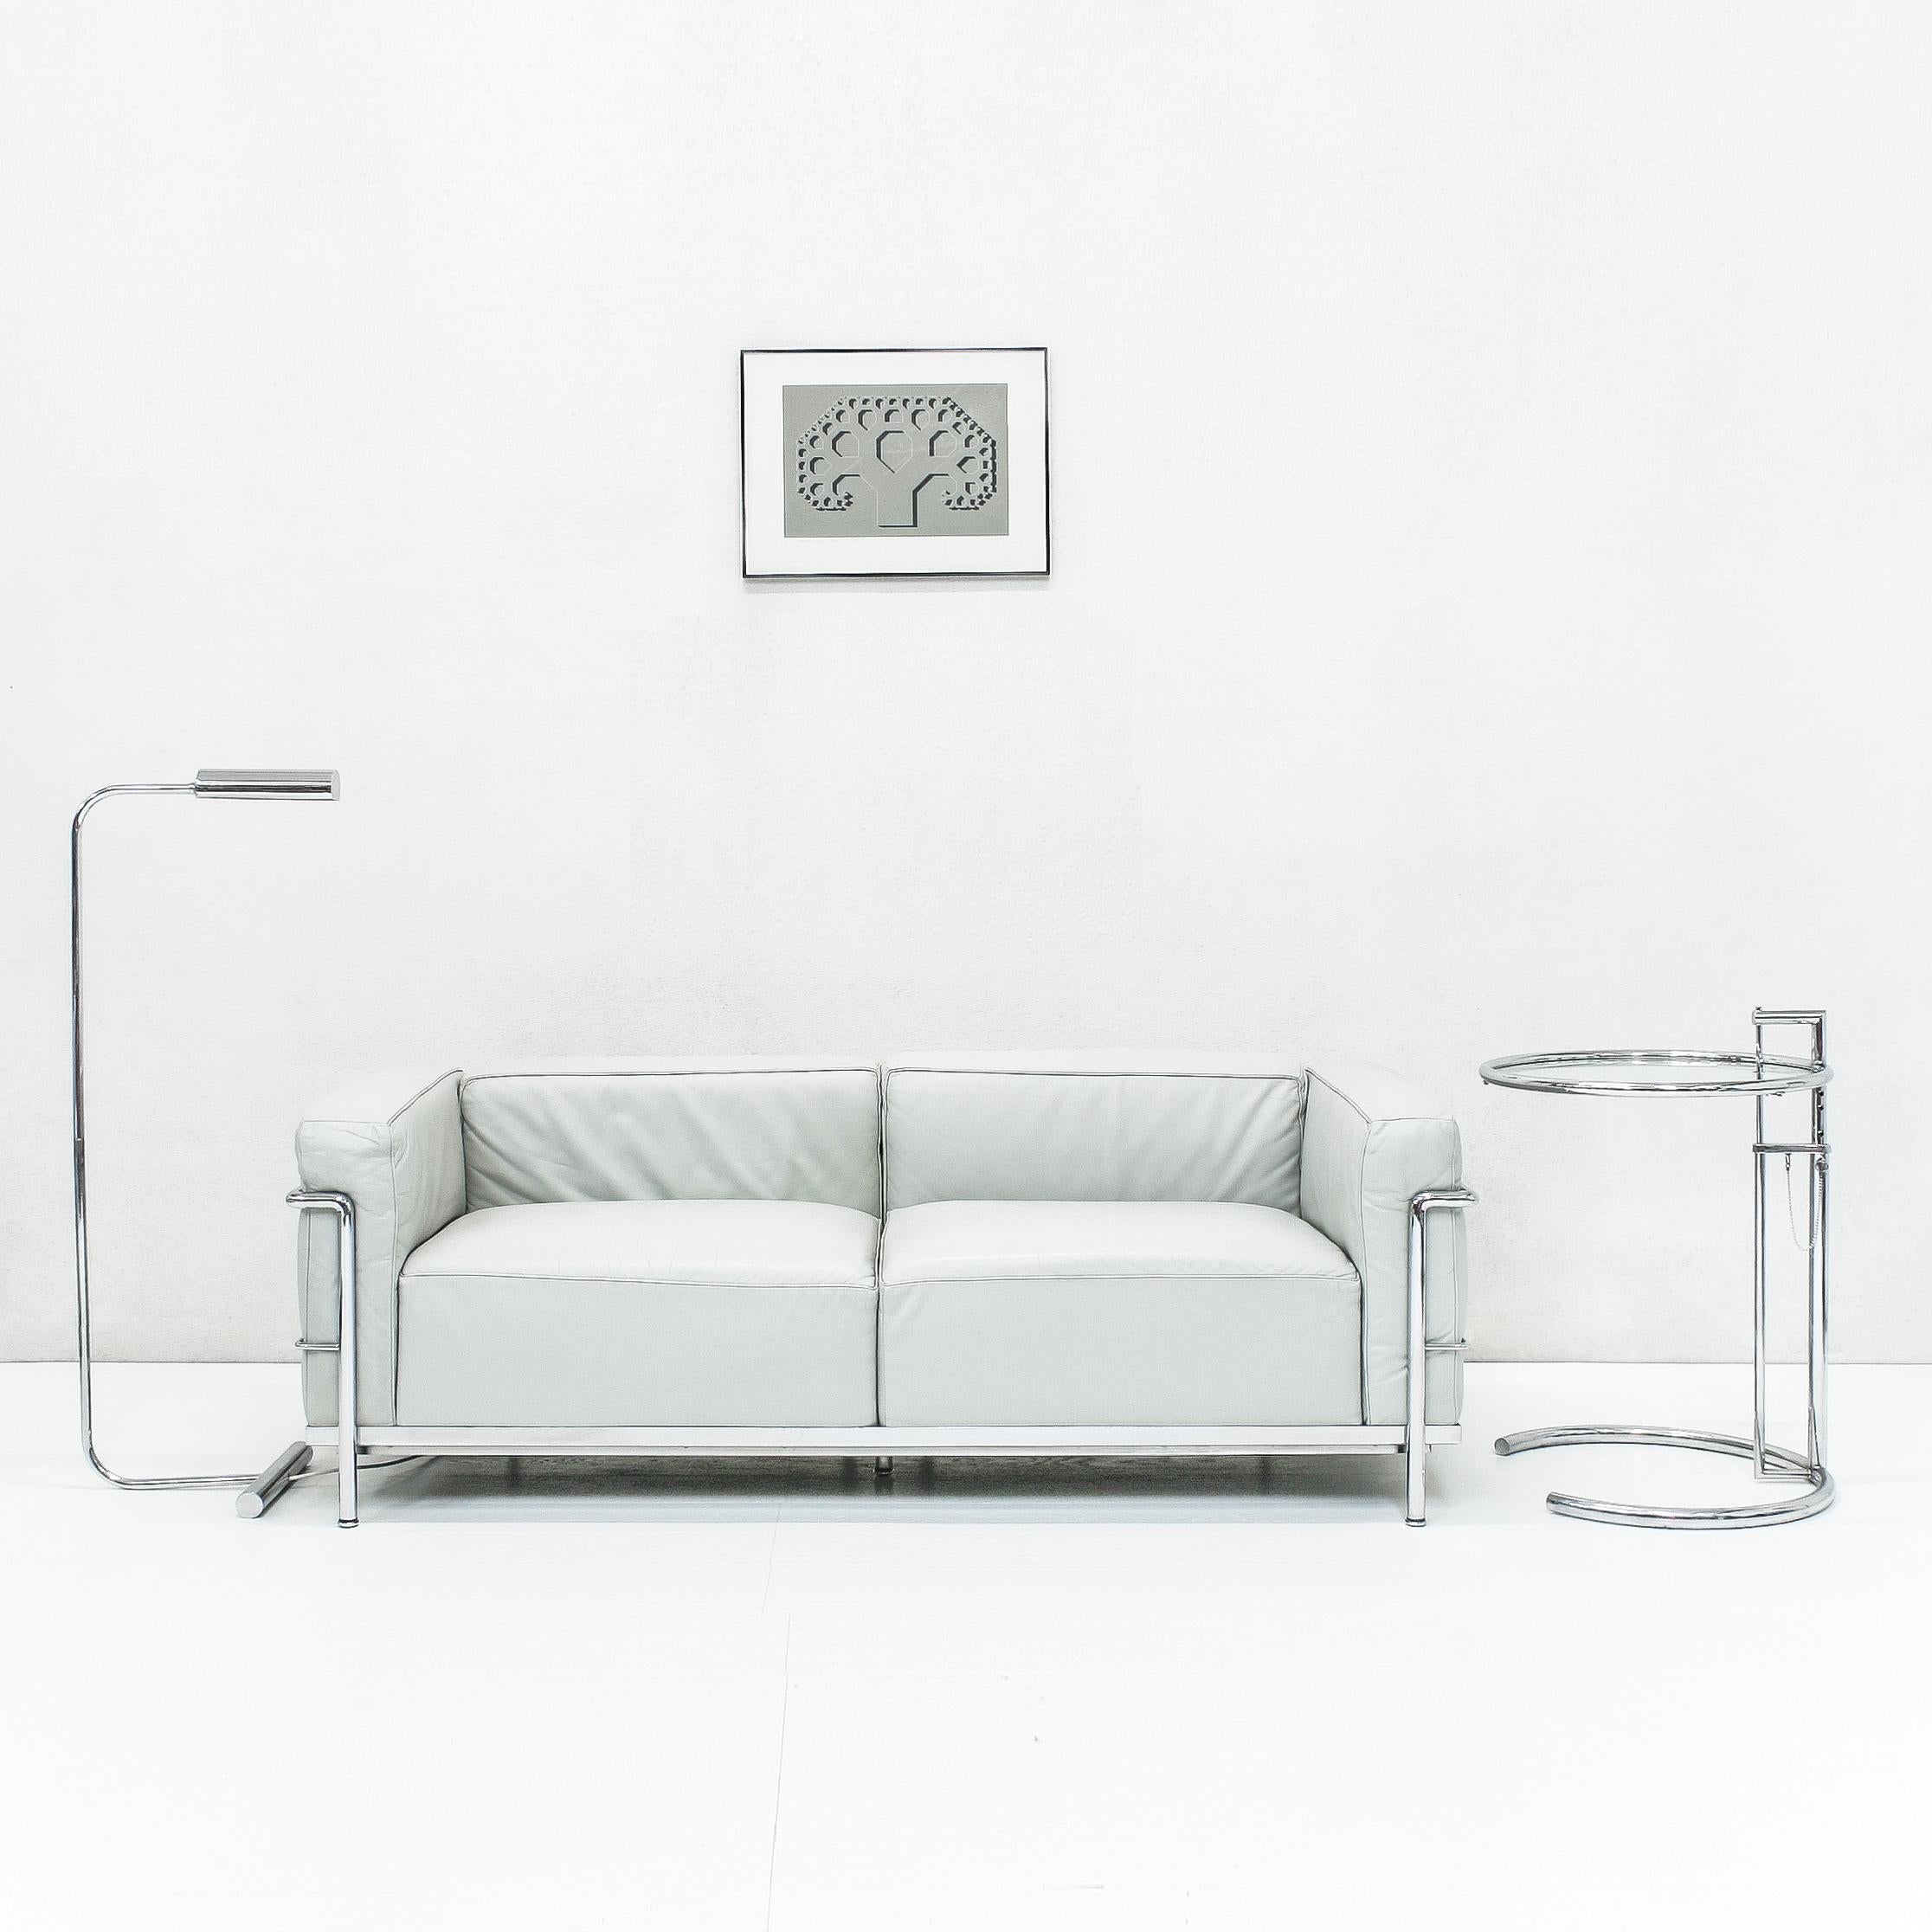 Leather LC3 Grand Confort Sofa by Le Corbusier & C. Perriand for Cassina (1/2) For Sale 4